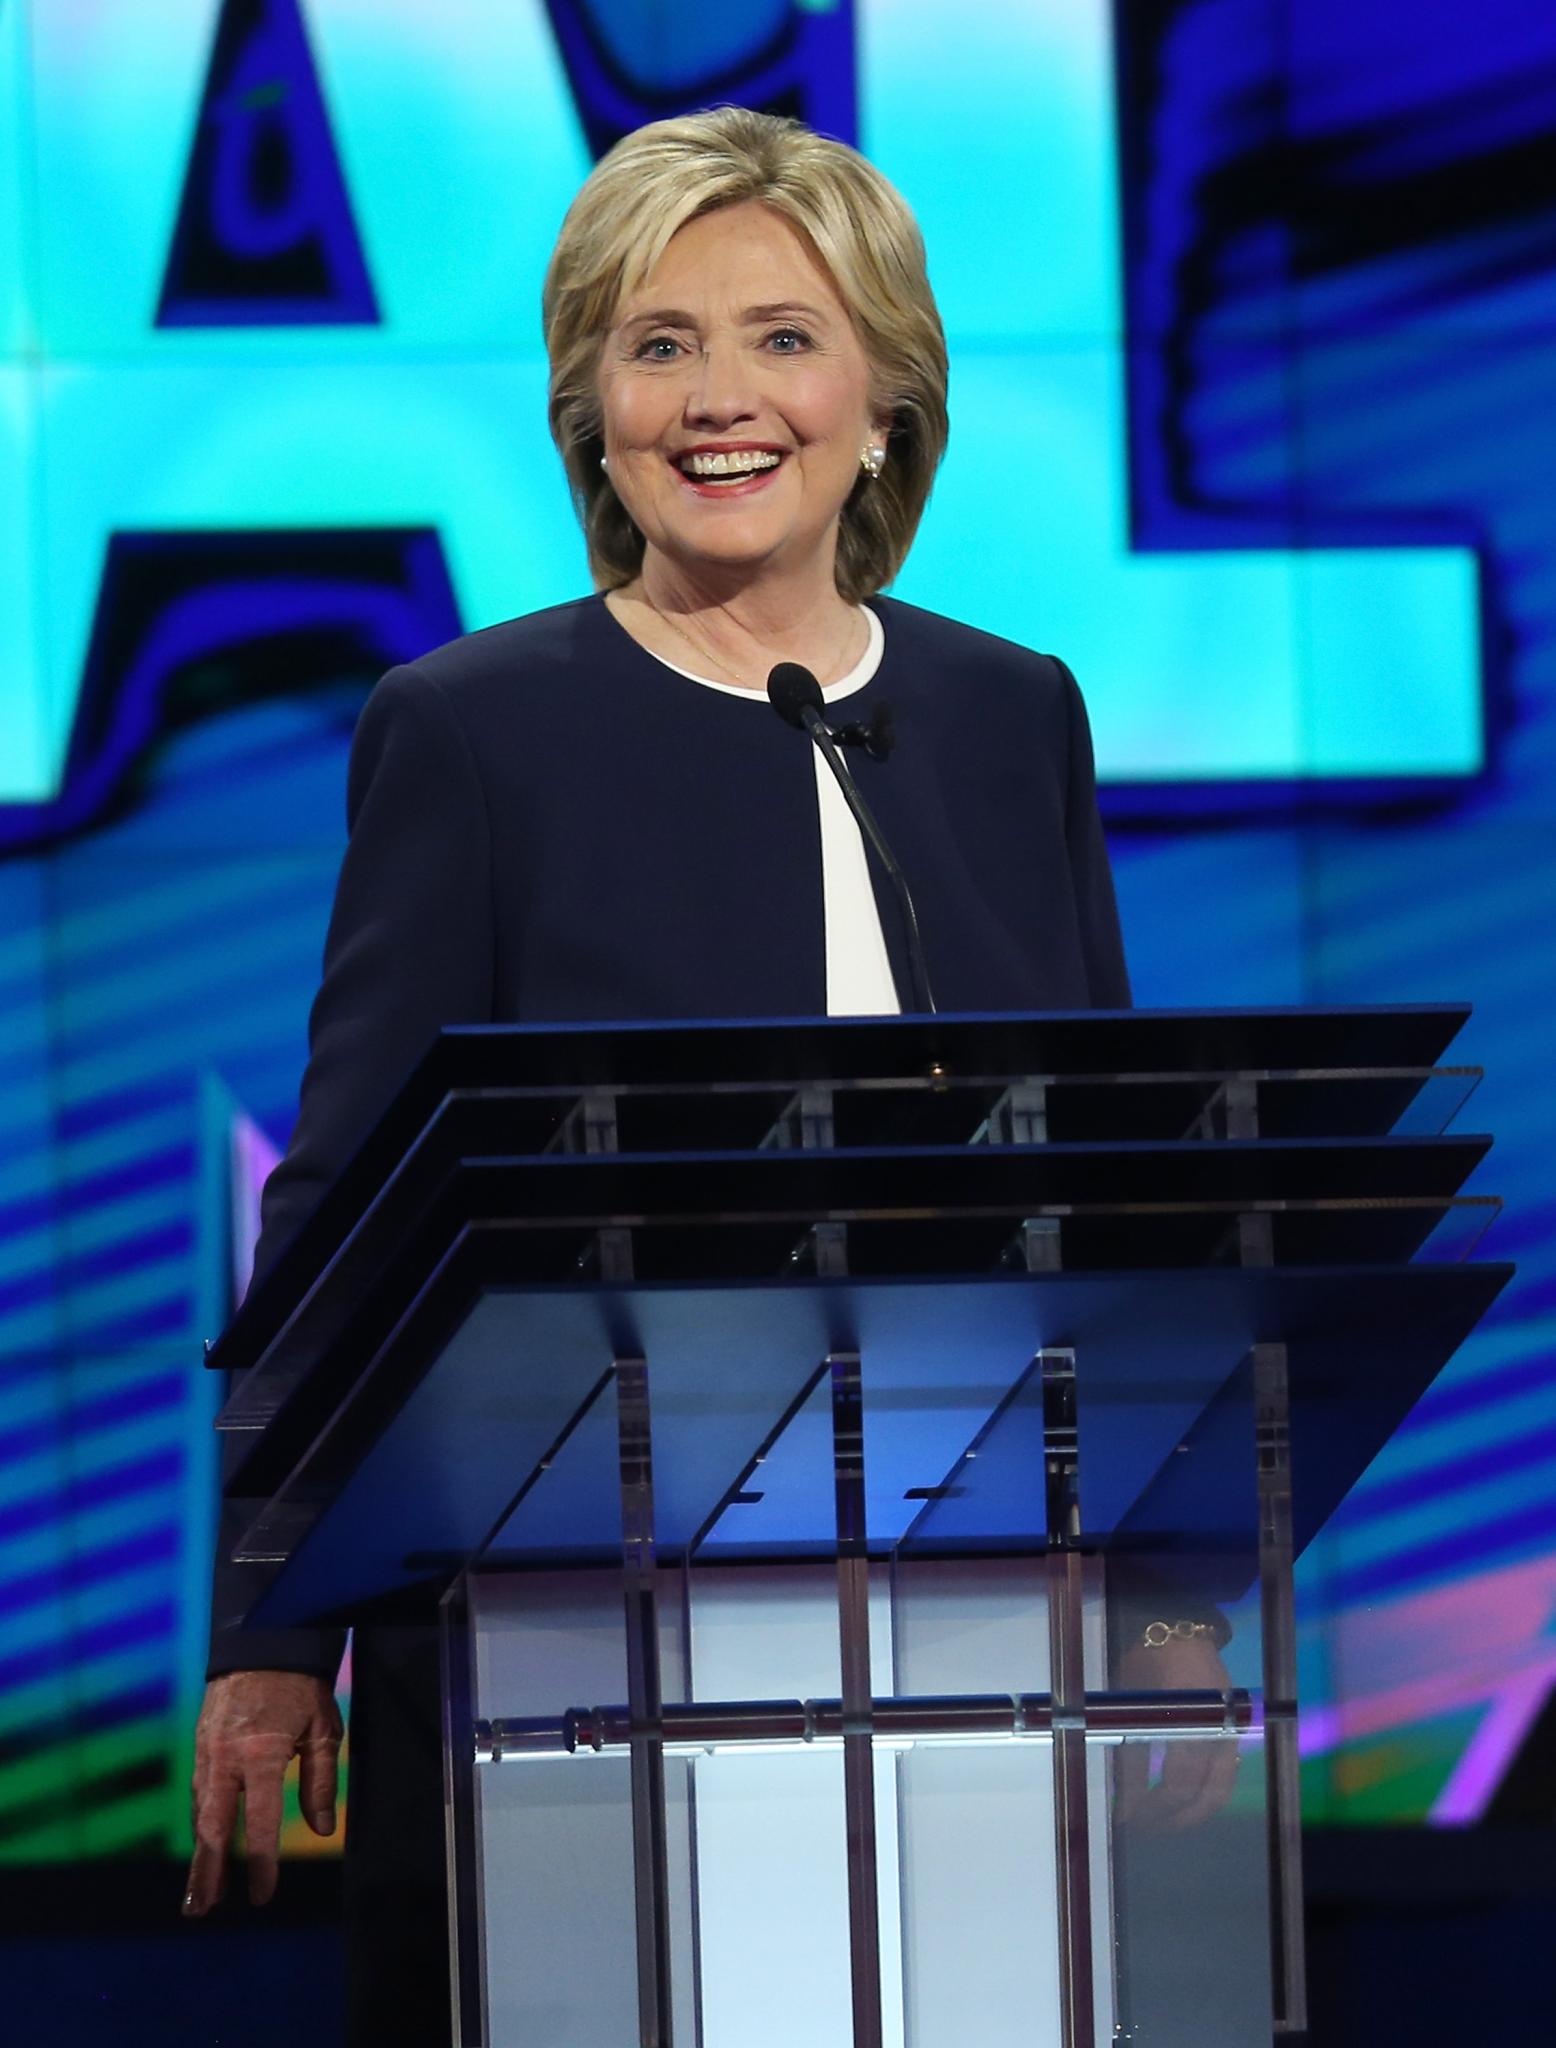 Did the Democratic Debate Topics Speak to Your Personal Situation?